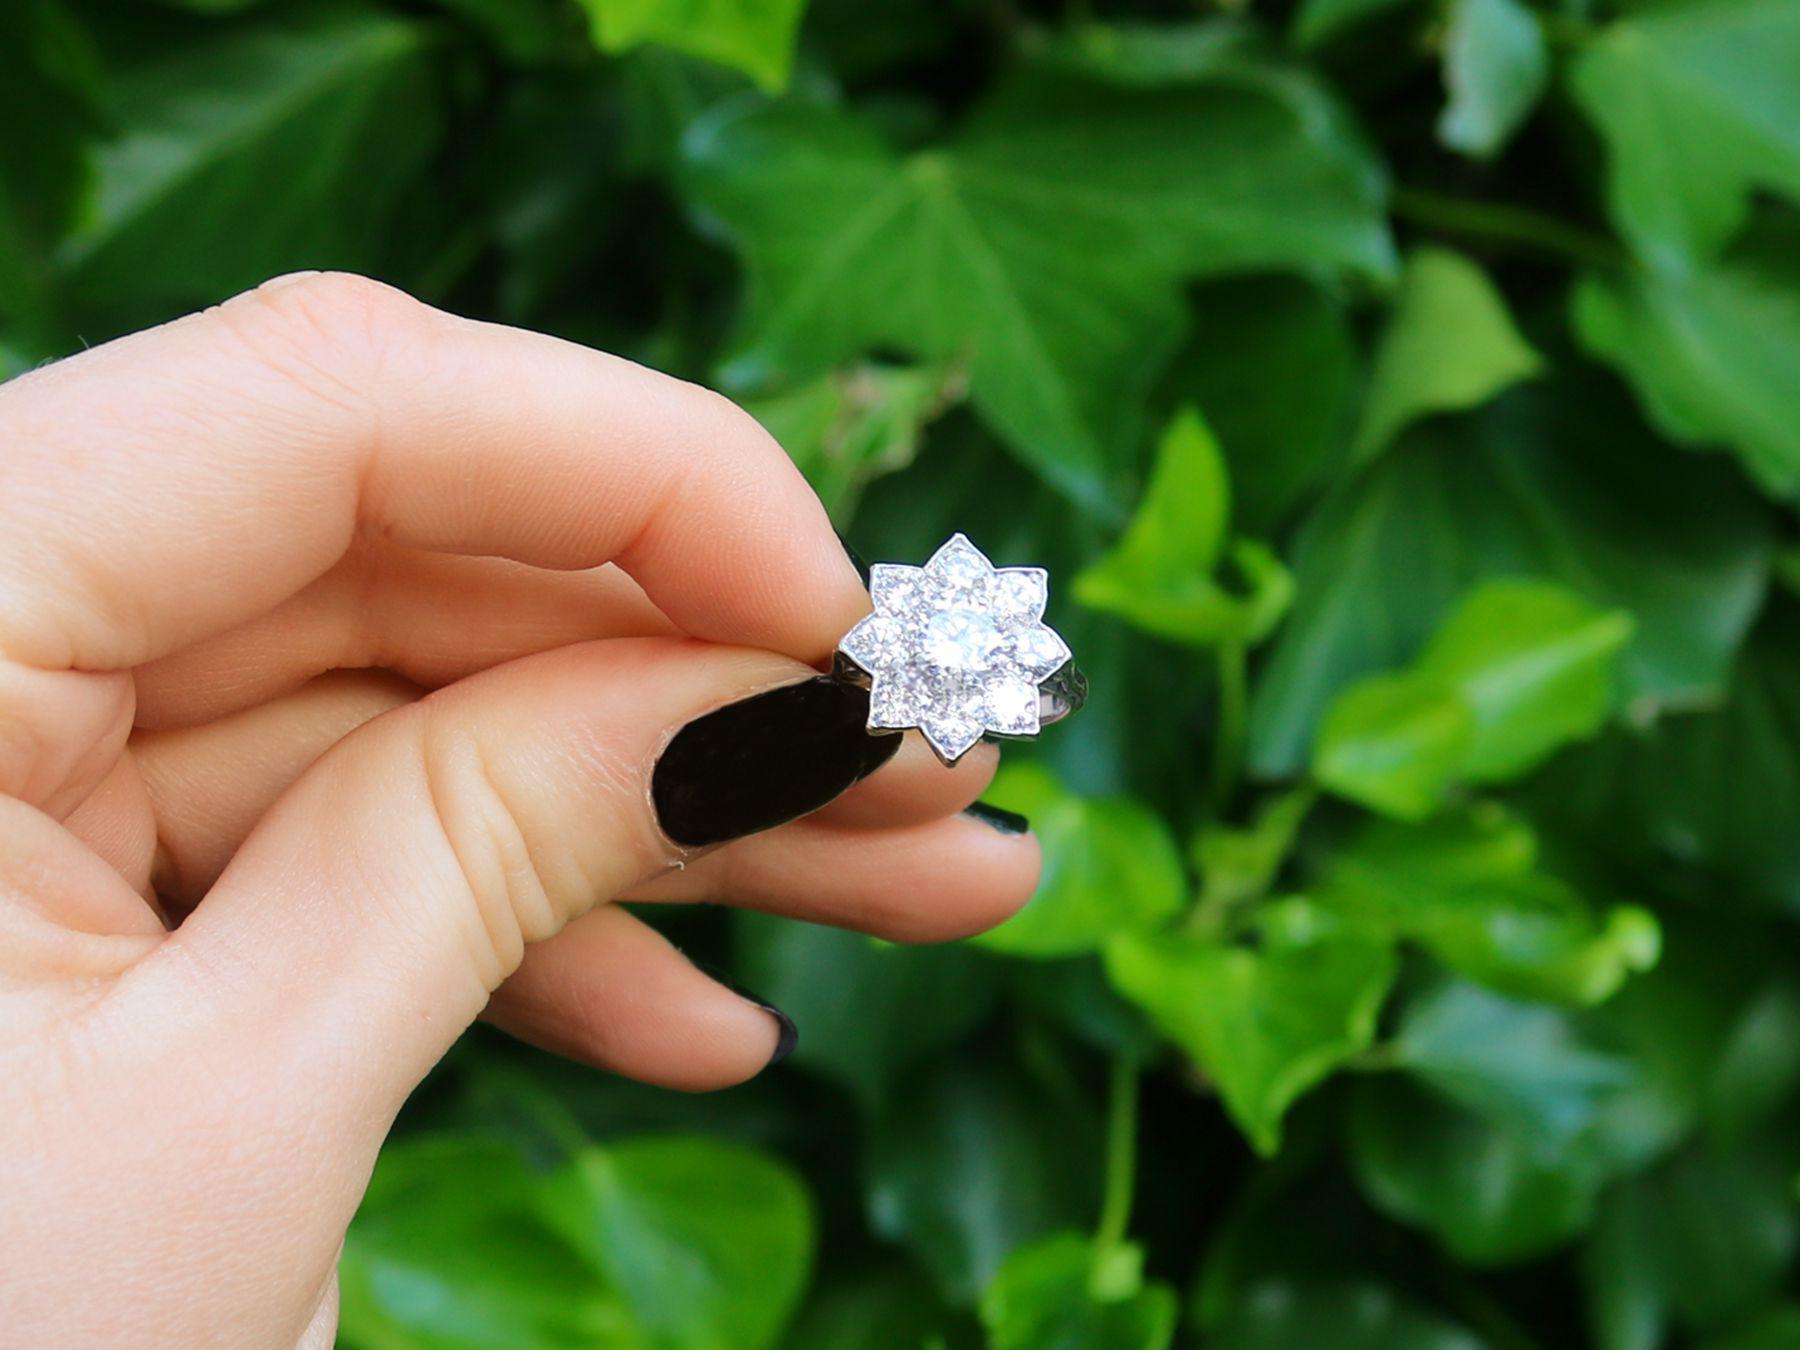 A stunning vintage 1940s 1.87 carat diamond and 18 karat white gold, platinum set floral cluster ring; part of our diverse diamond jewelry and estate jewelry collections.

This stunning, fine and impressive vintage diamond ring has been crafted in